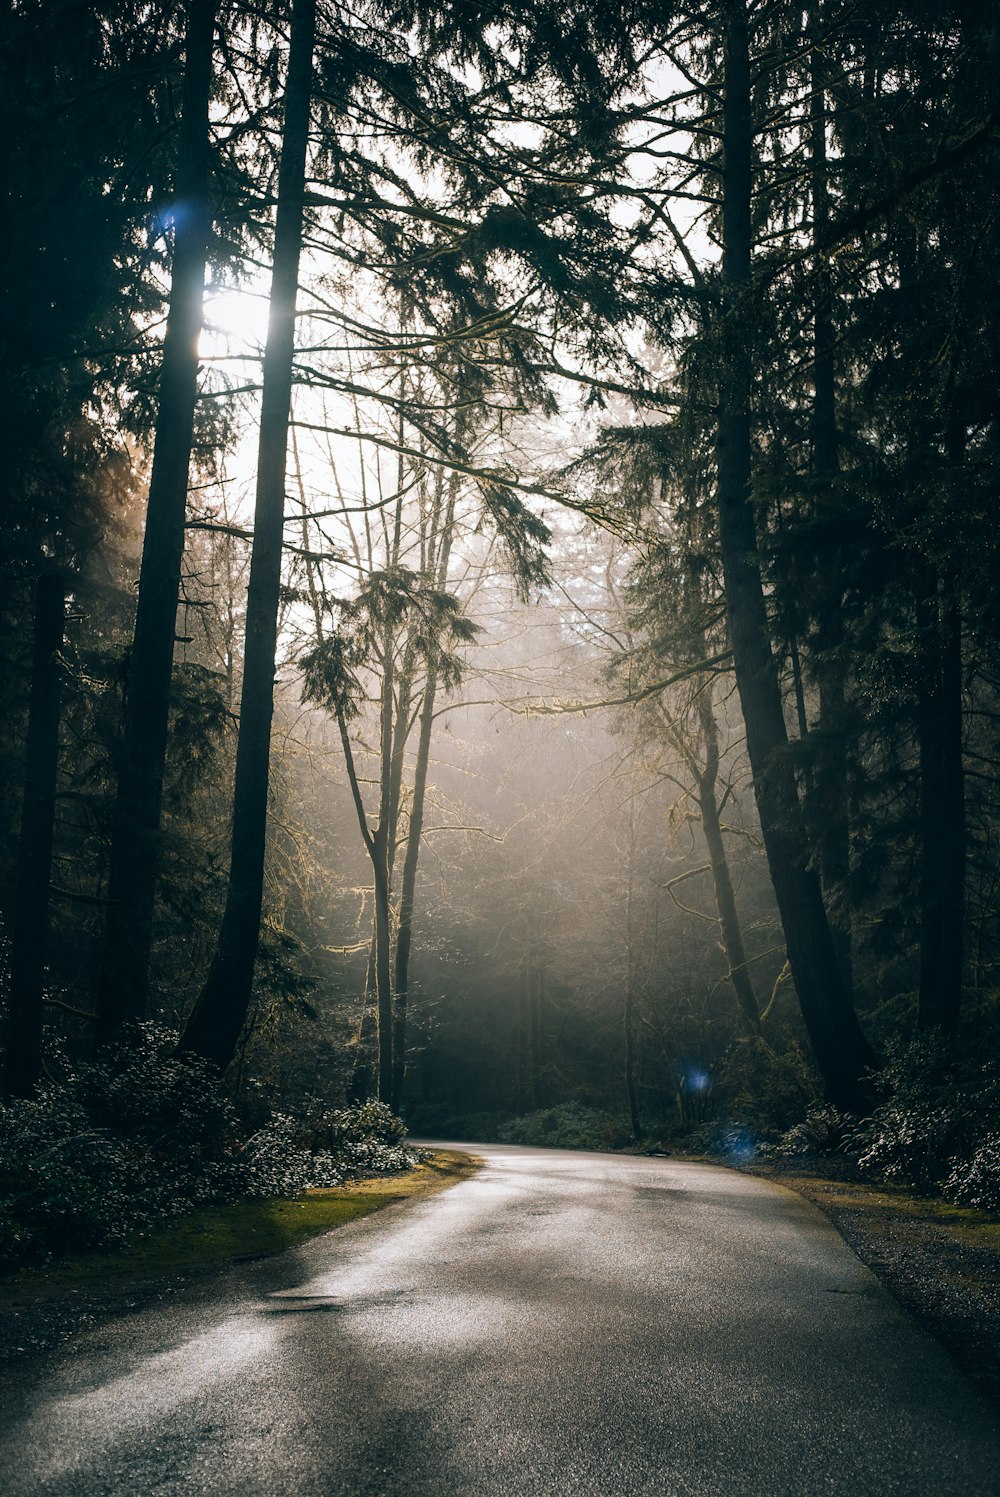 a road in the middle of a forest with sun shining through the trees